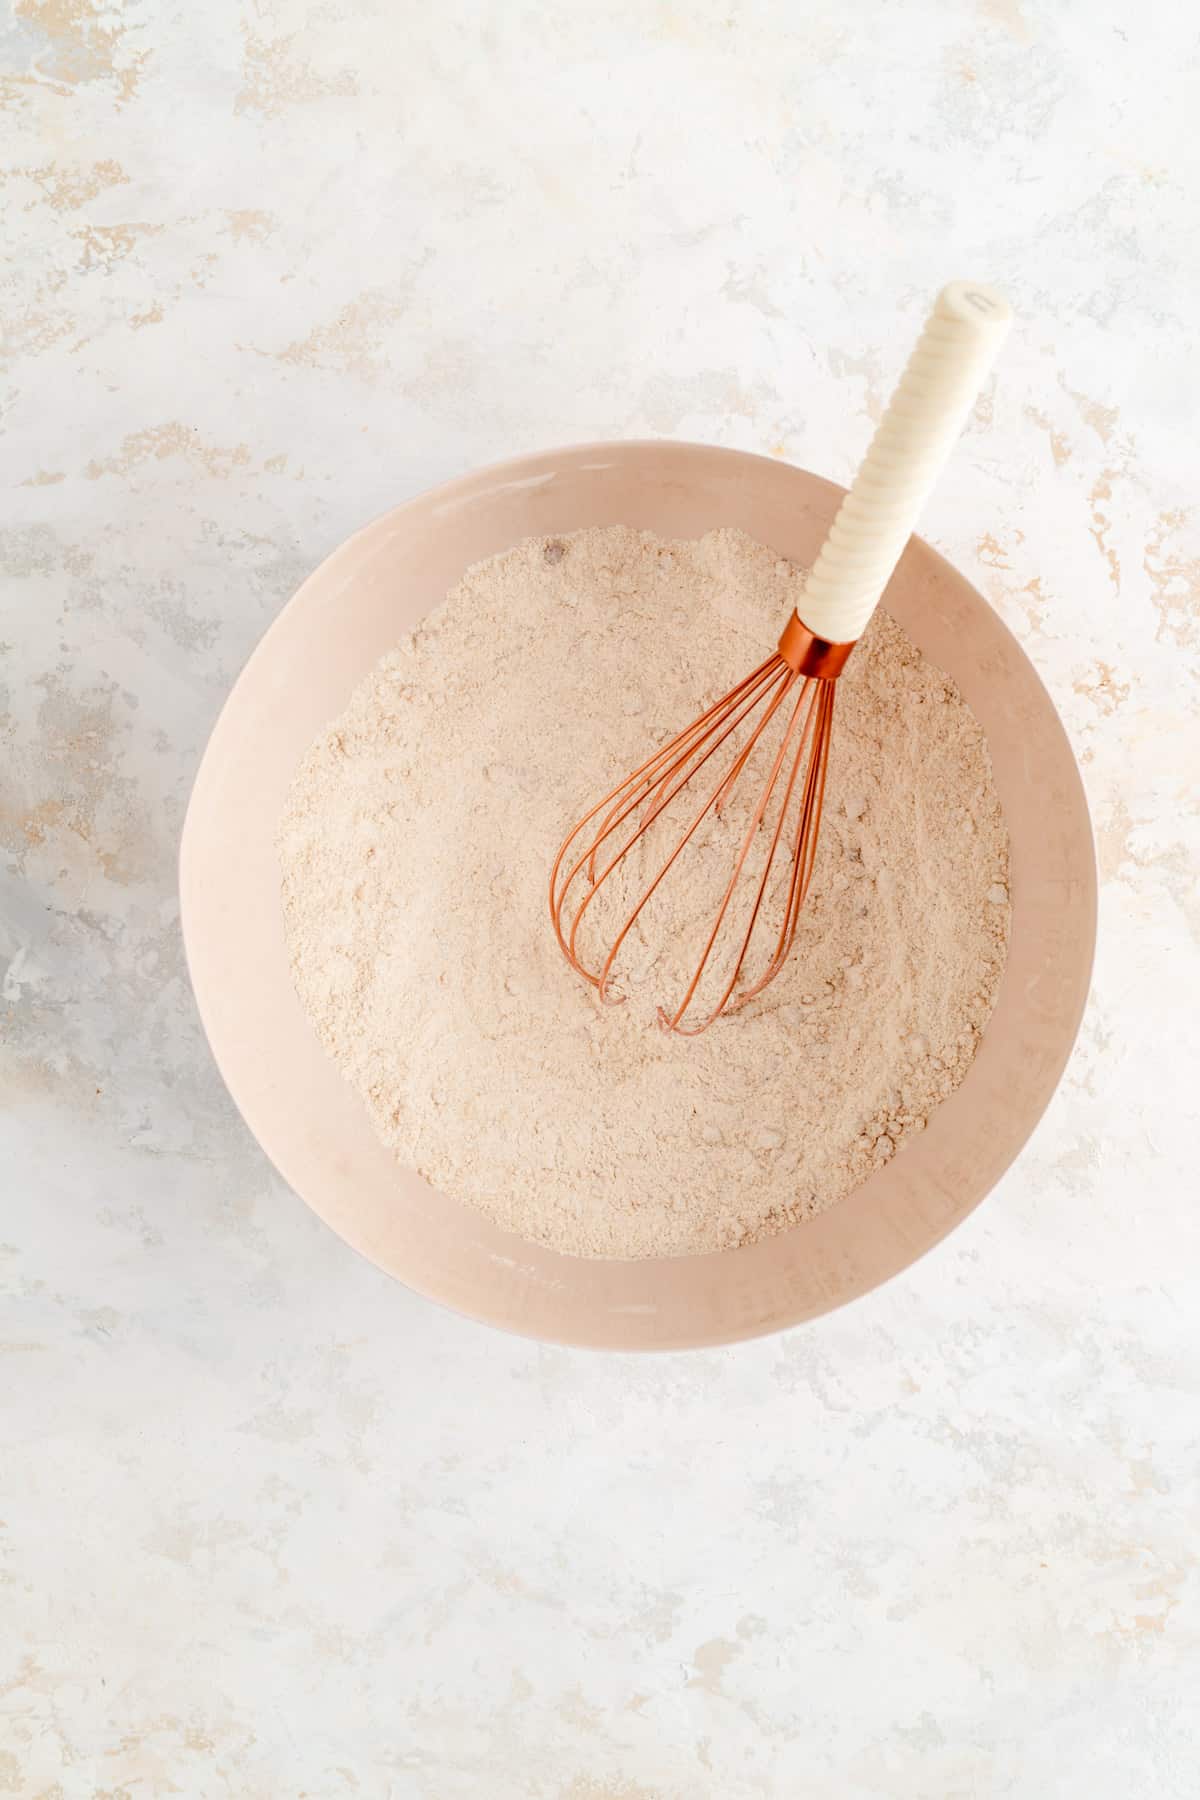 Mixed dry ingredients in tan bowl with copper and white whisk on white background.